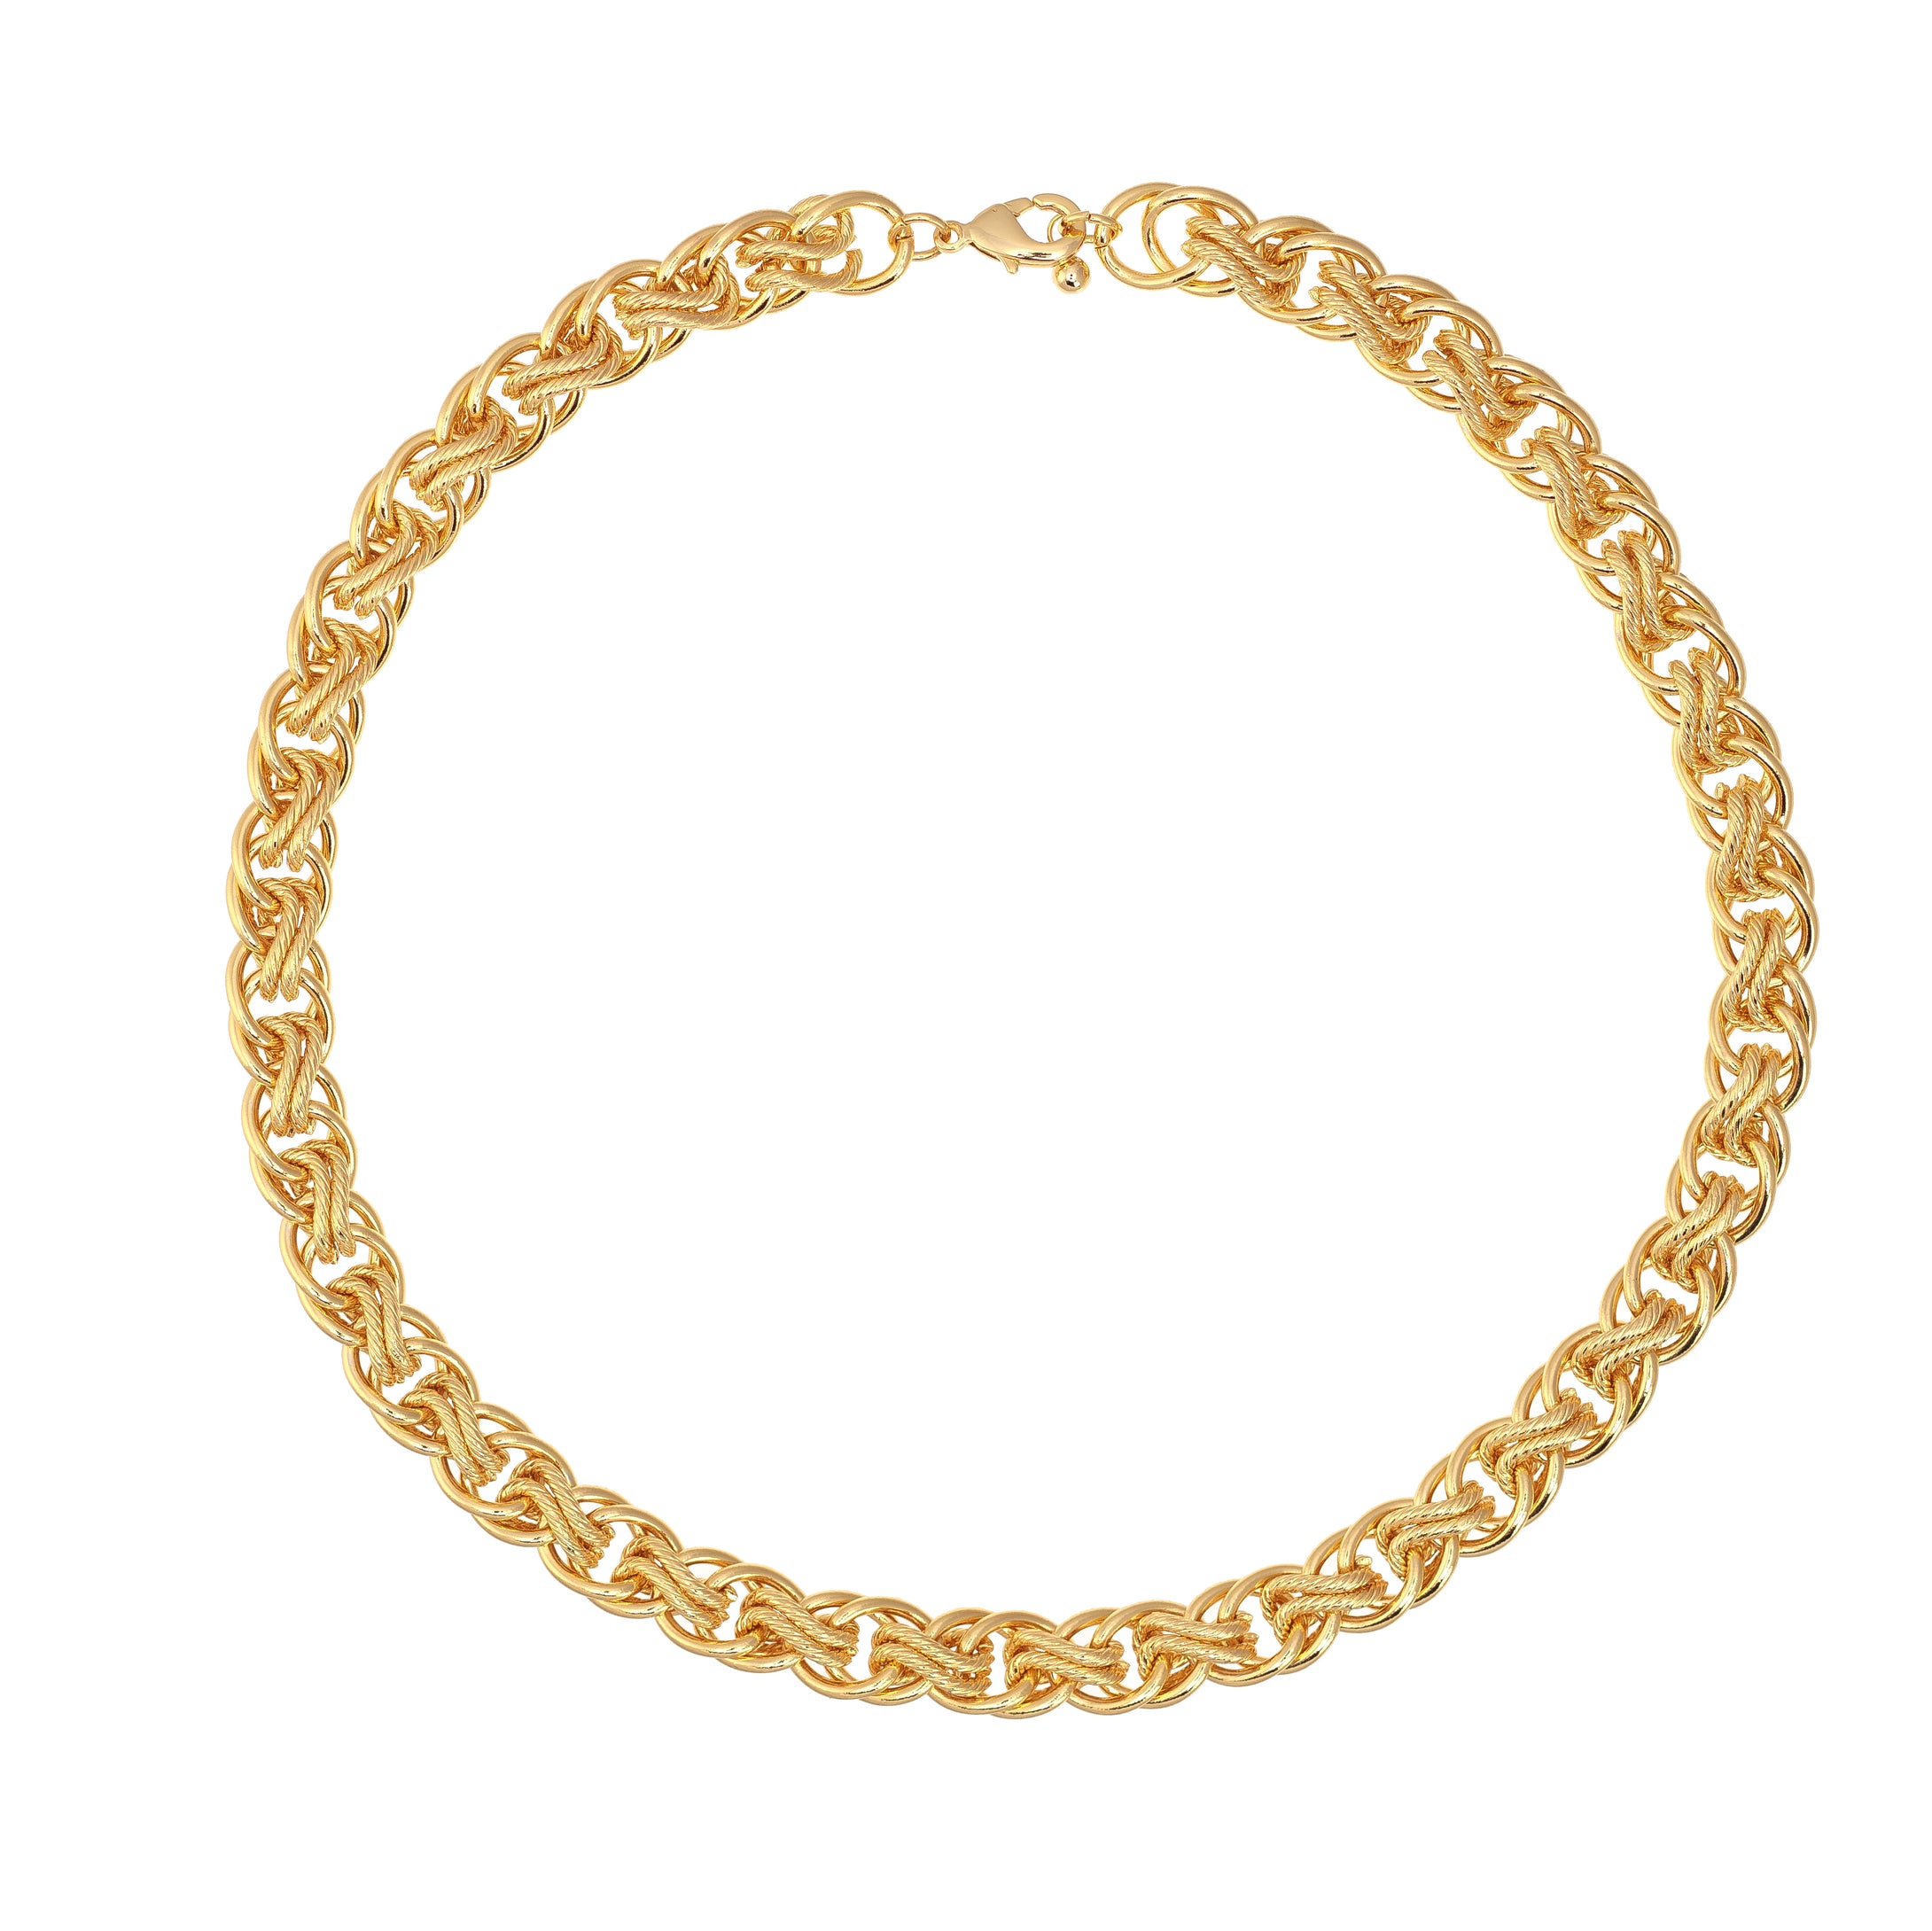 NEW! Cannes Necklace by TALIS CHAINS